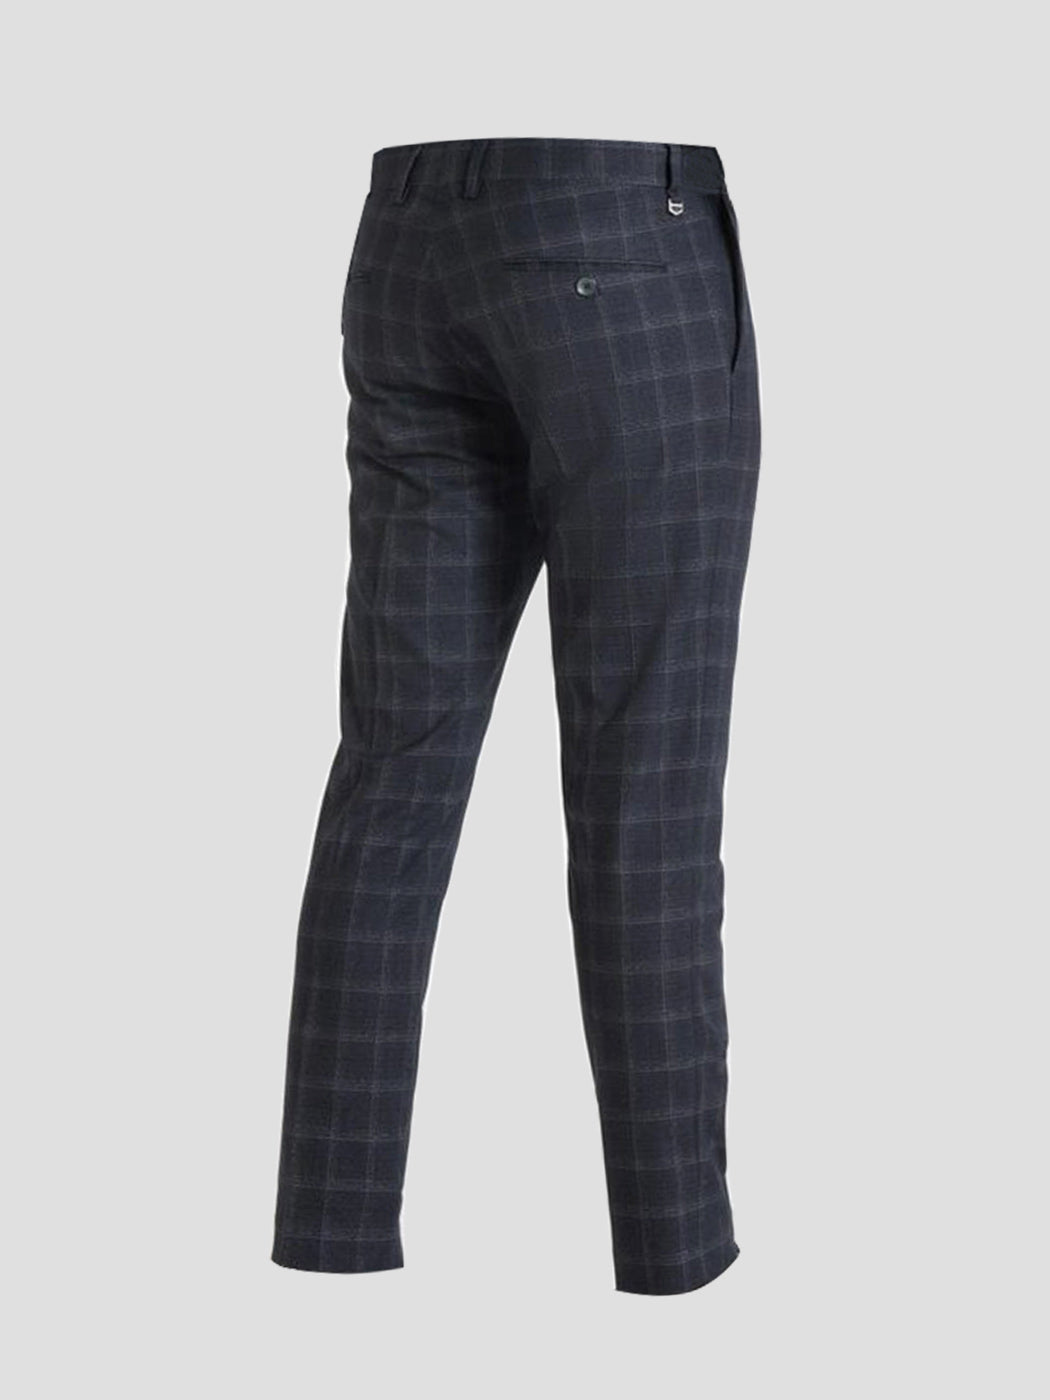 ANTONY MORATO Blue Trousers with a check pattern for boy - MKTS00013